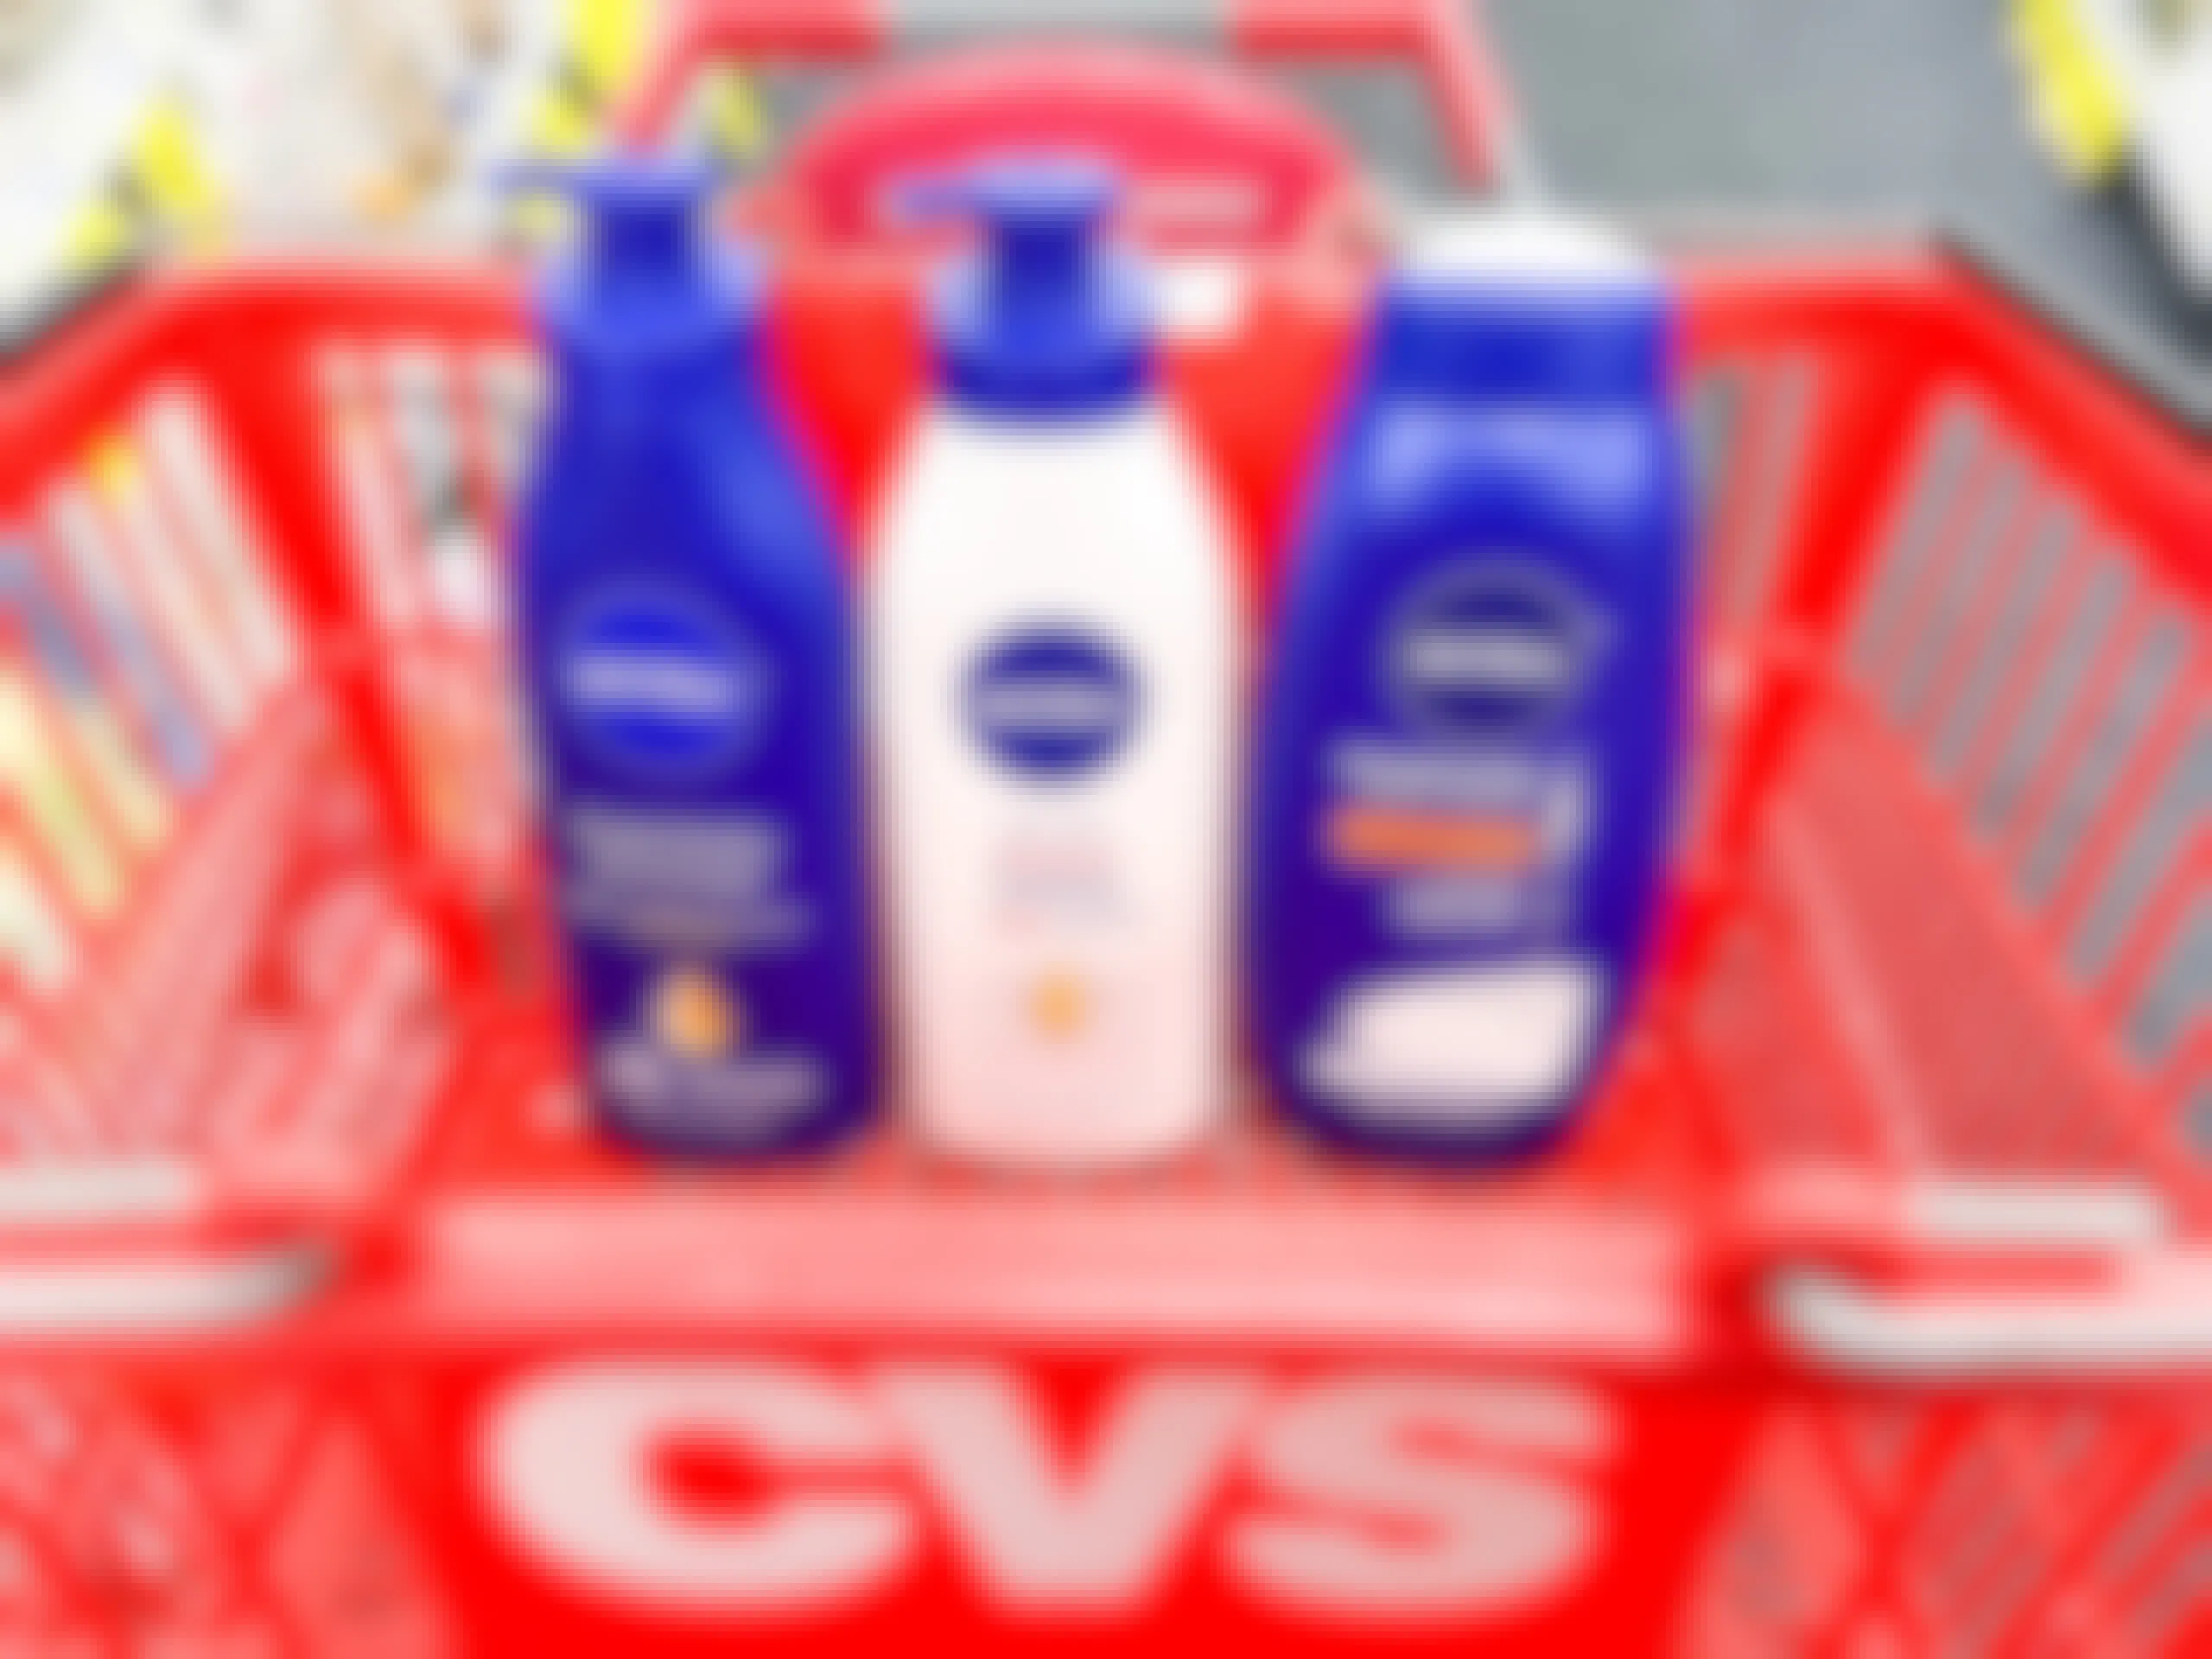 two bottles of Nivea body lotion and one bottle of body wash in shopping cart